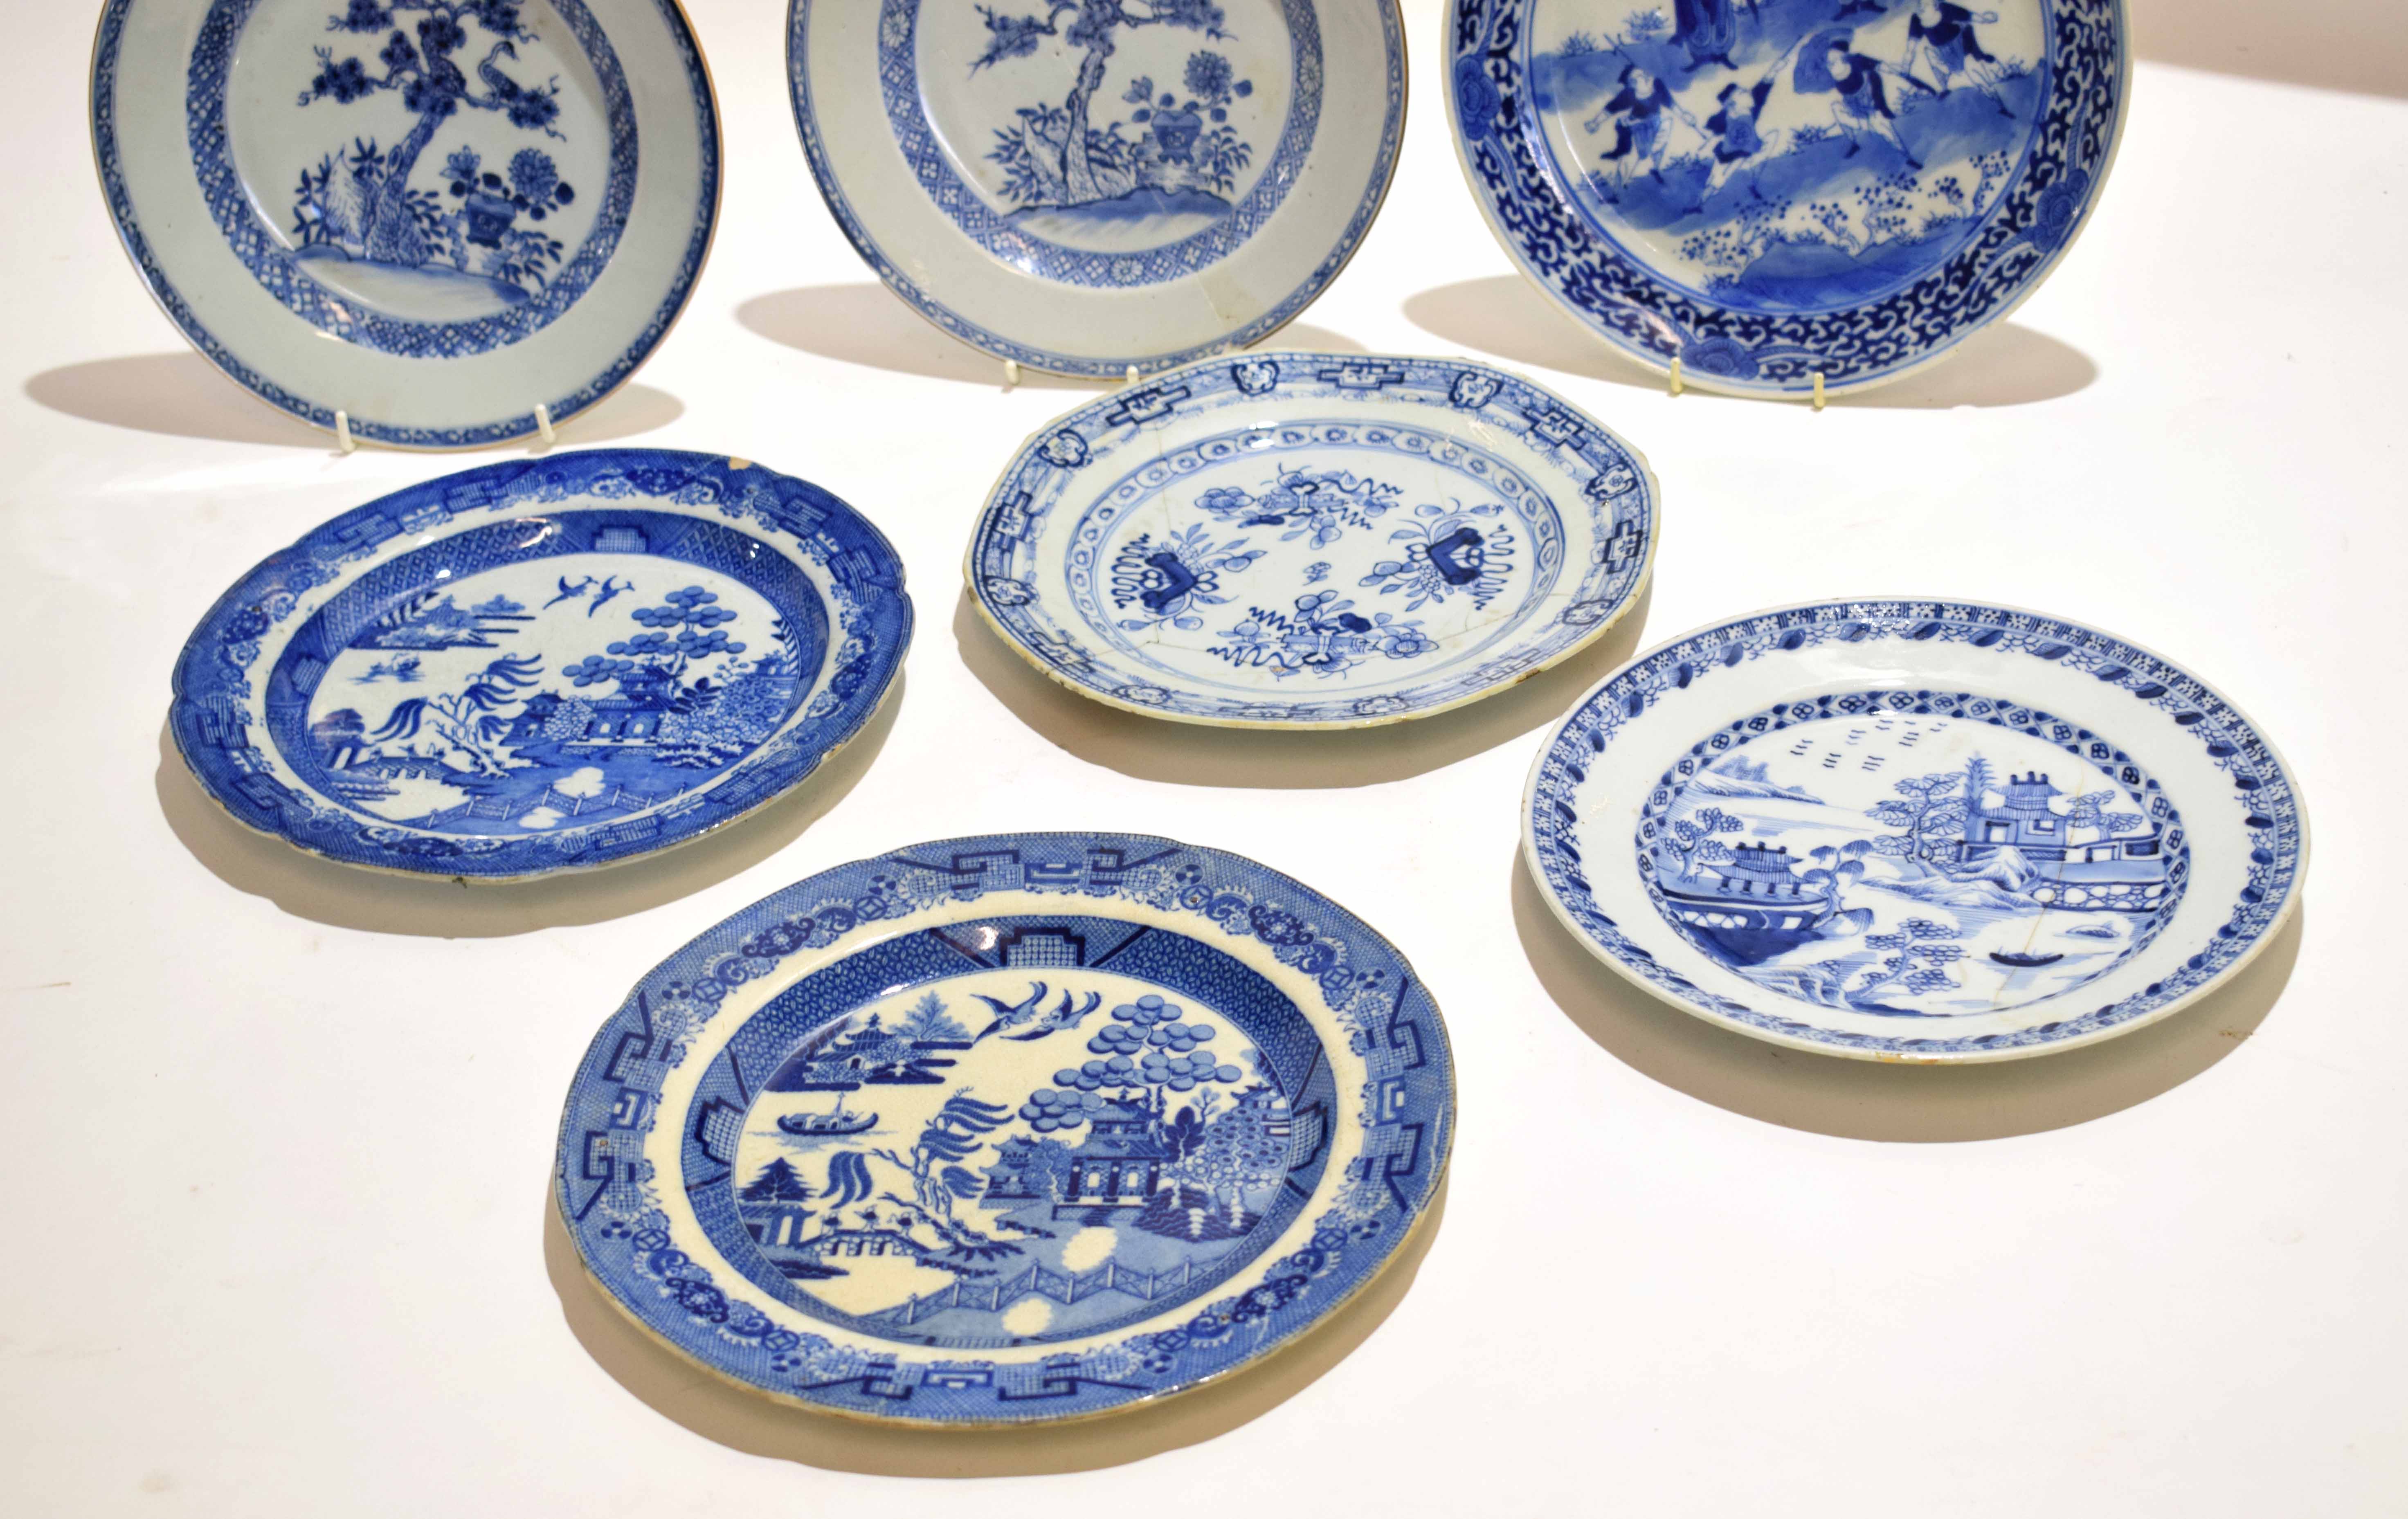 Group of five late 18th century Chinese porcelain plates with blue and white design, together with - Image 3 of 8